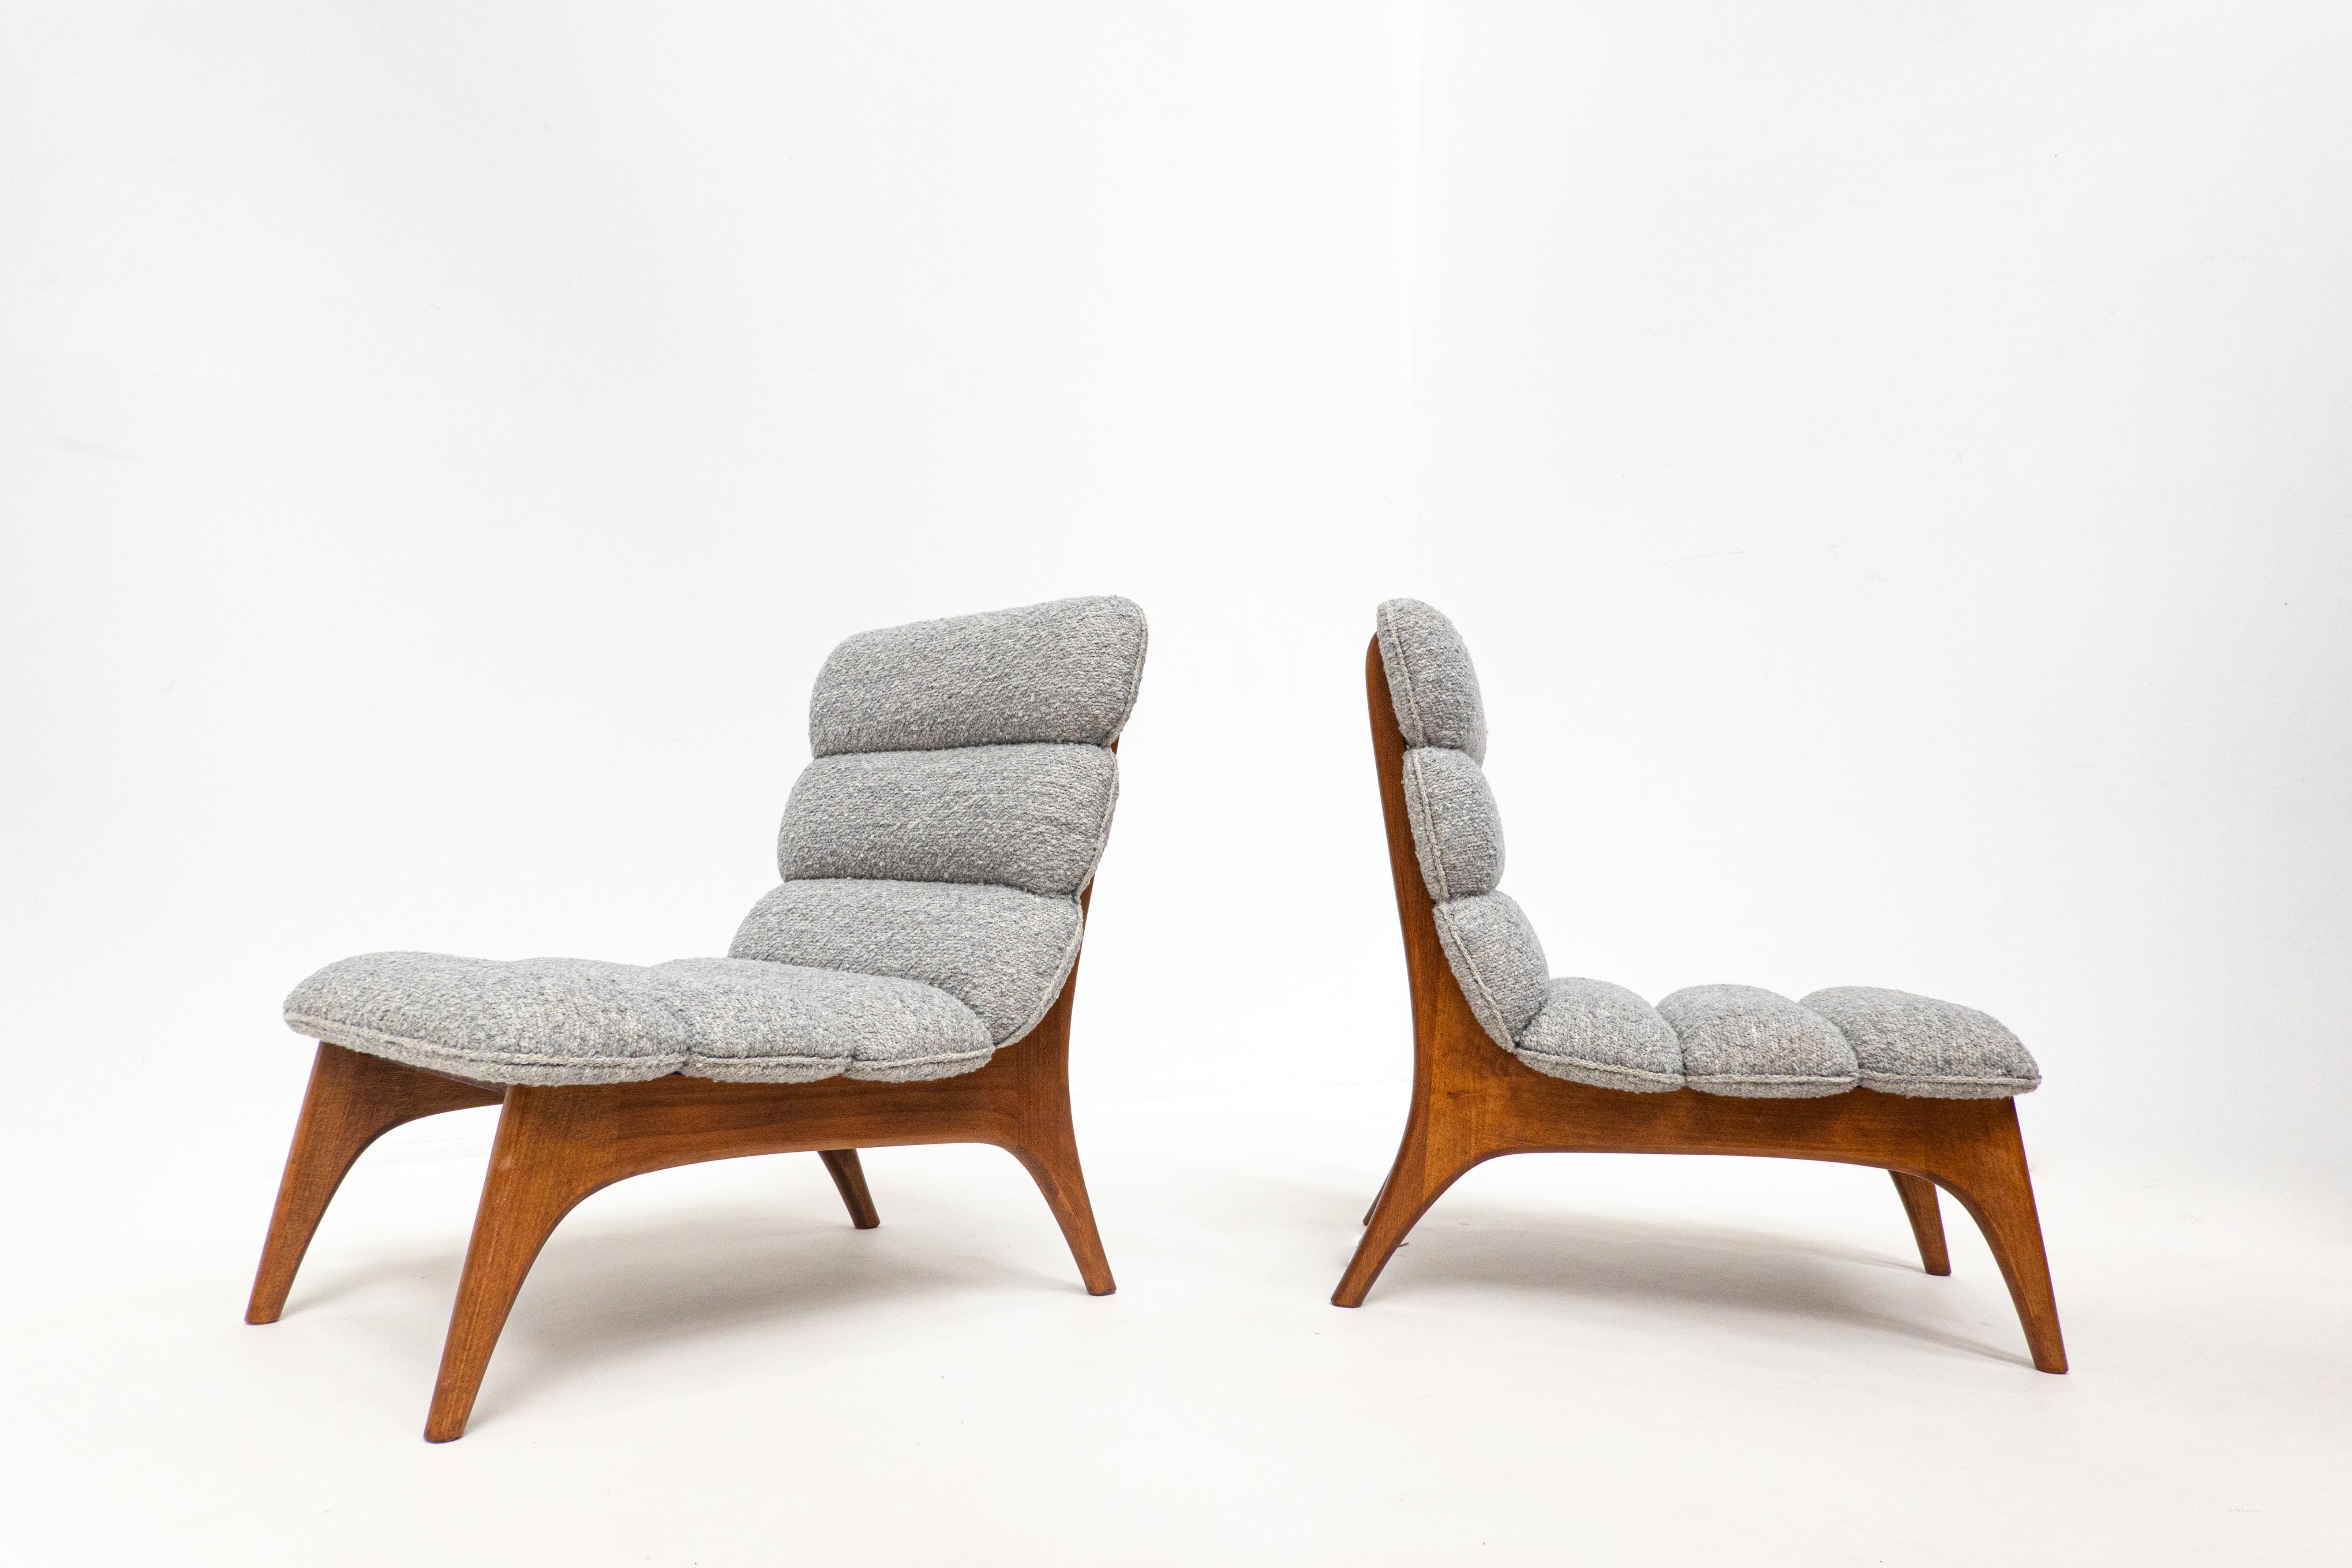 Pair of contemporary easy chairs, wood and fabric, Italy.